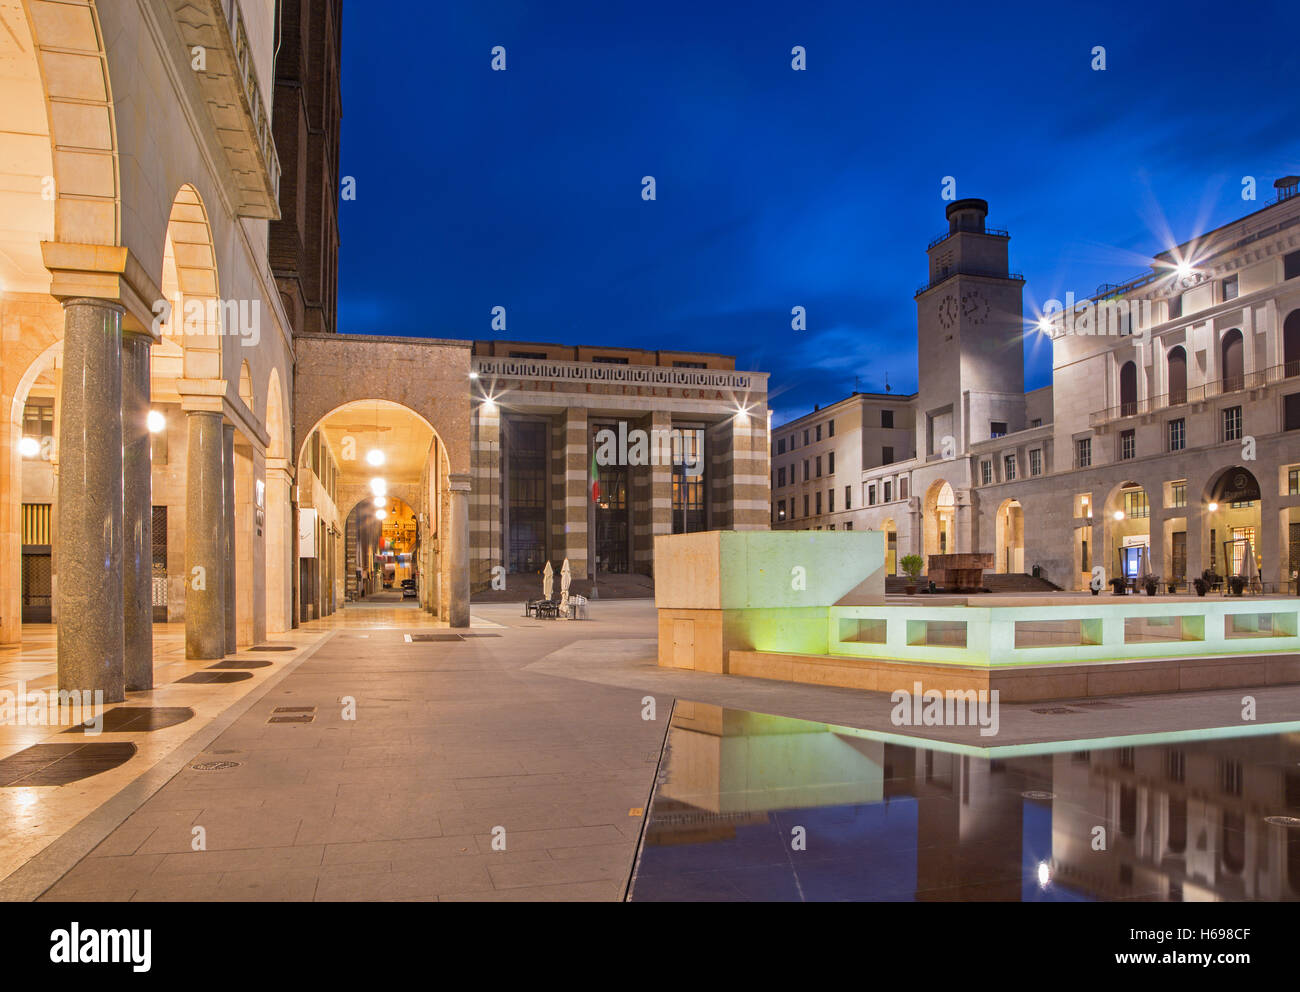 CREMONA, ITALY - MAY 23, 2016: The Piazza Cavour square at dusk. Stock Photo